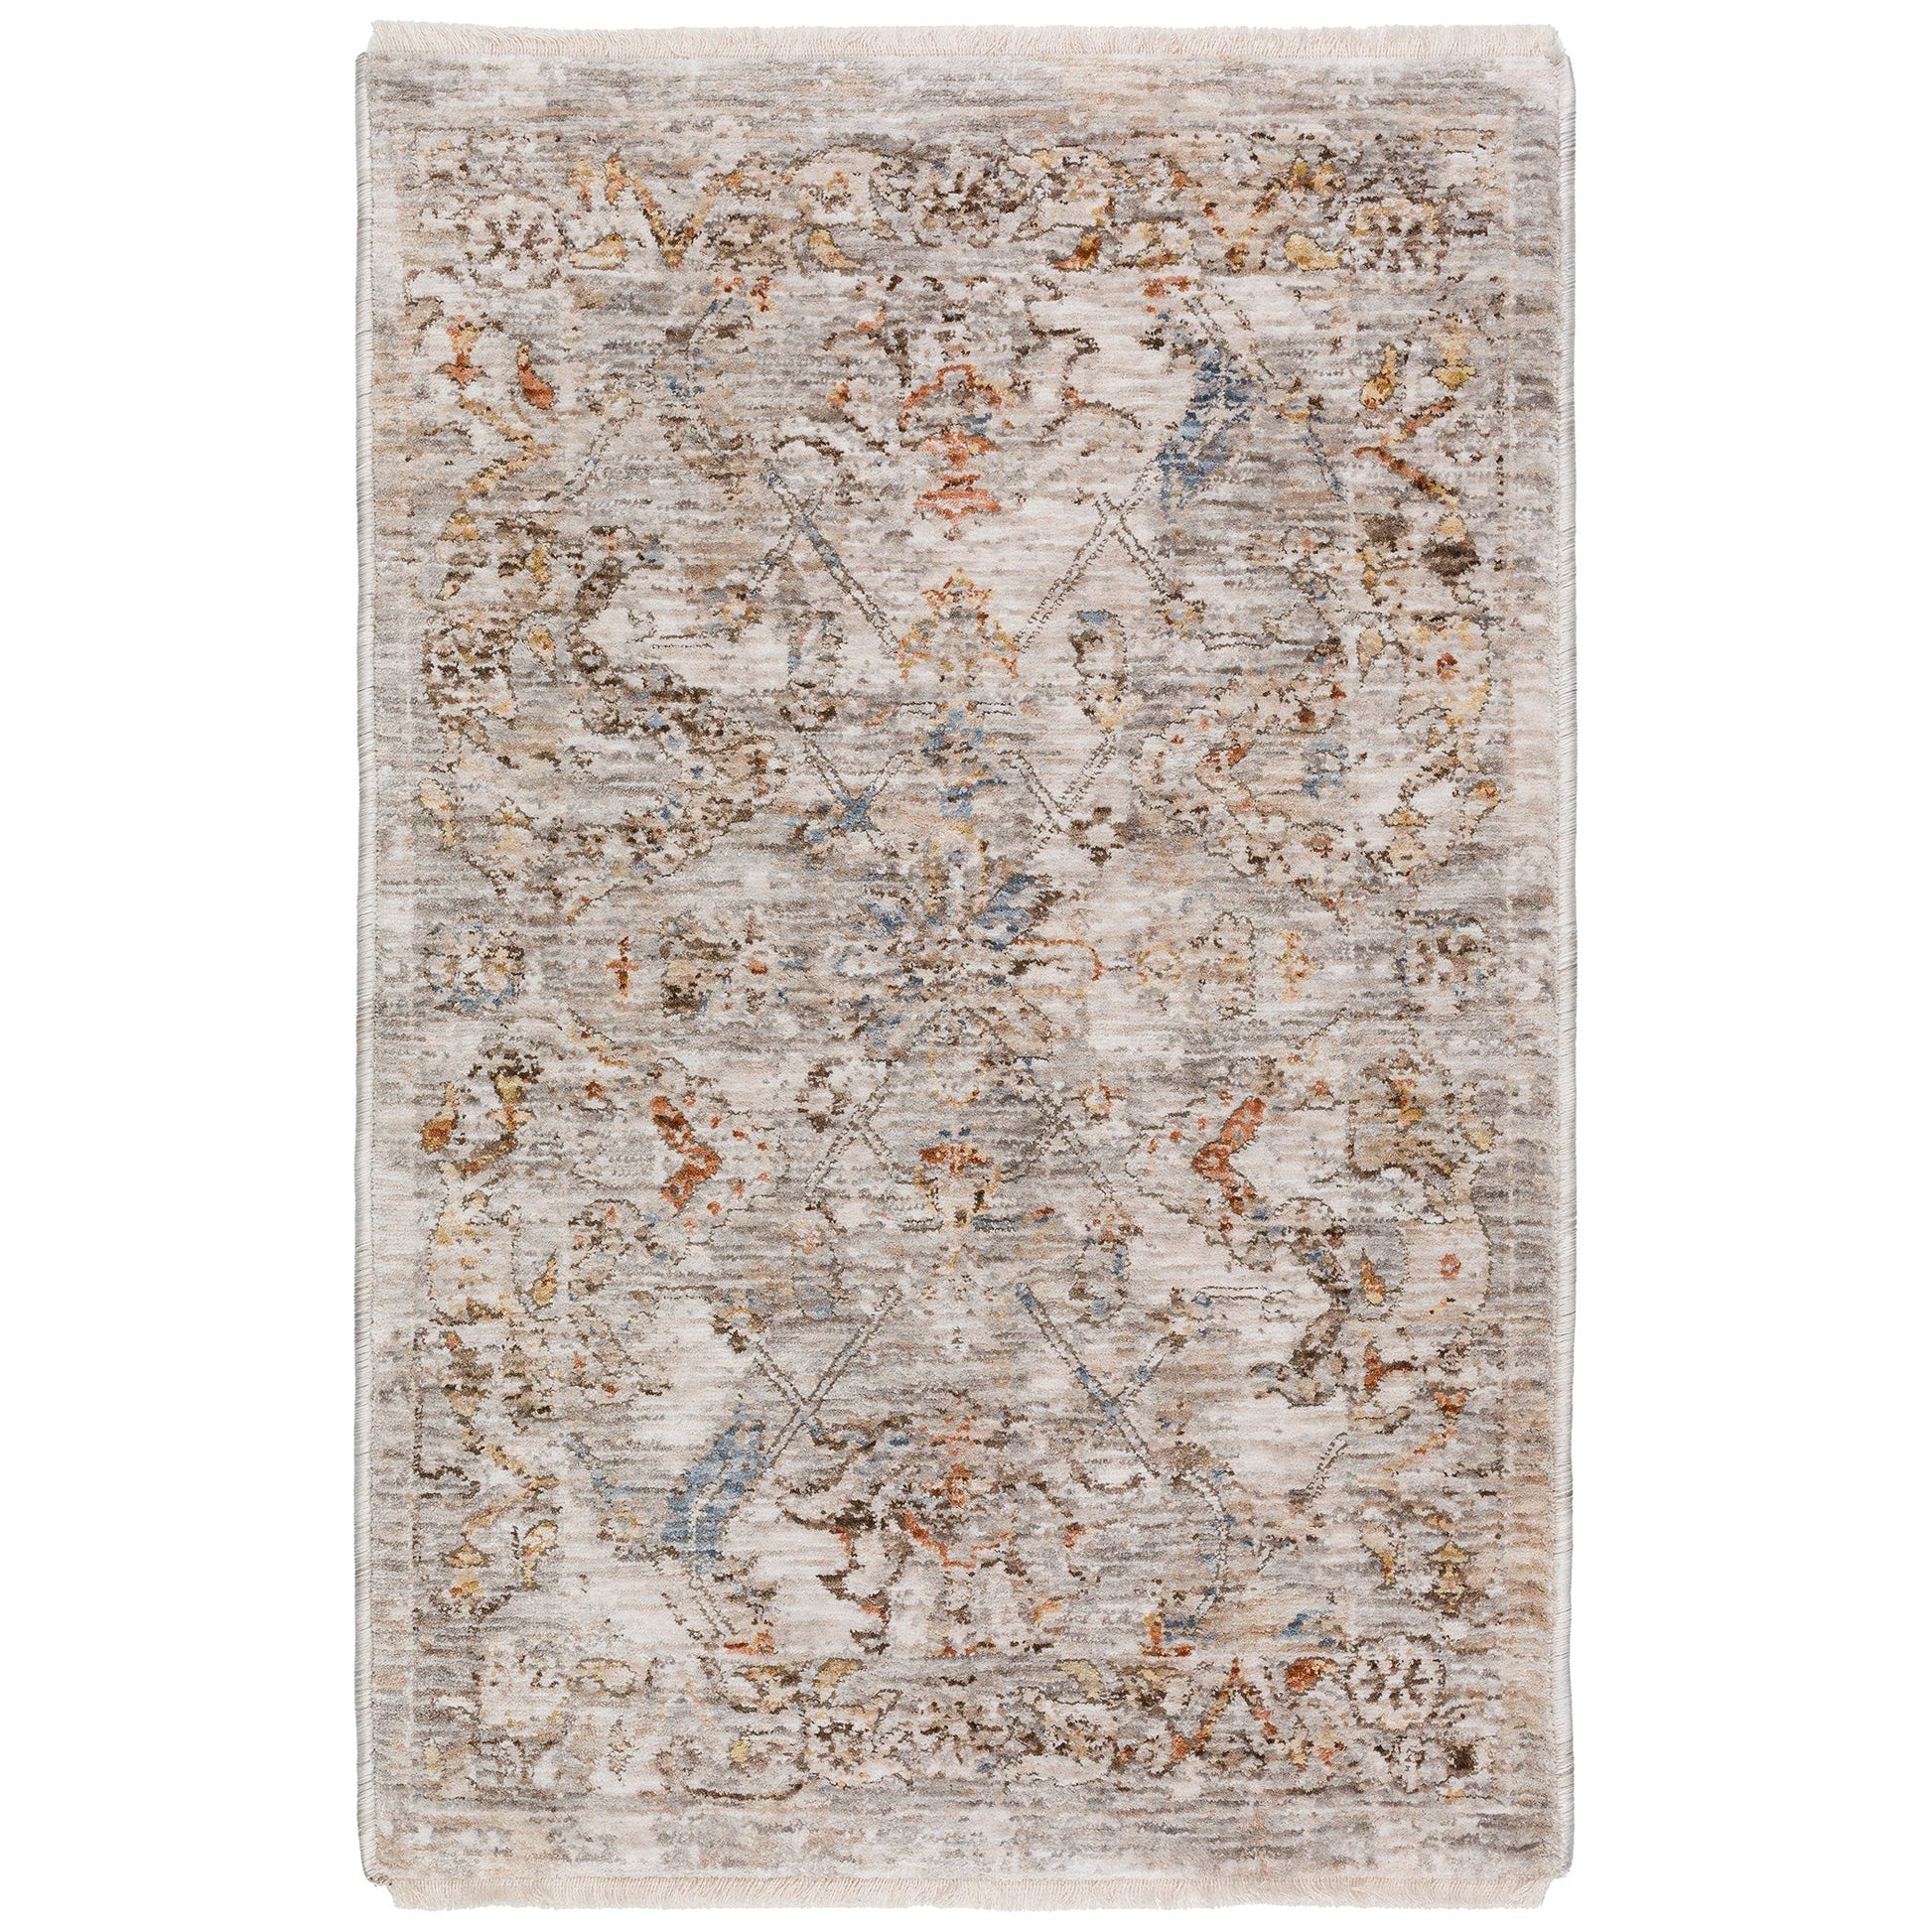 Dalyn Rugs Vienna VI3 Linen Traditional Power Woven Rug